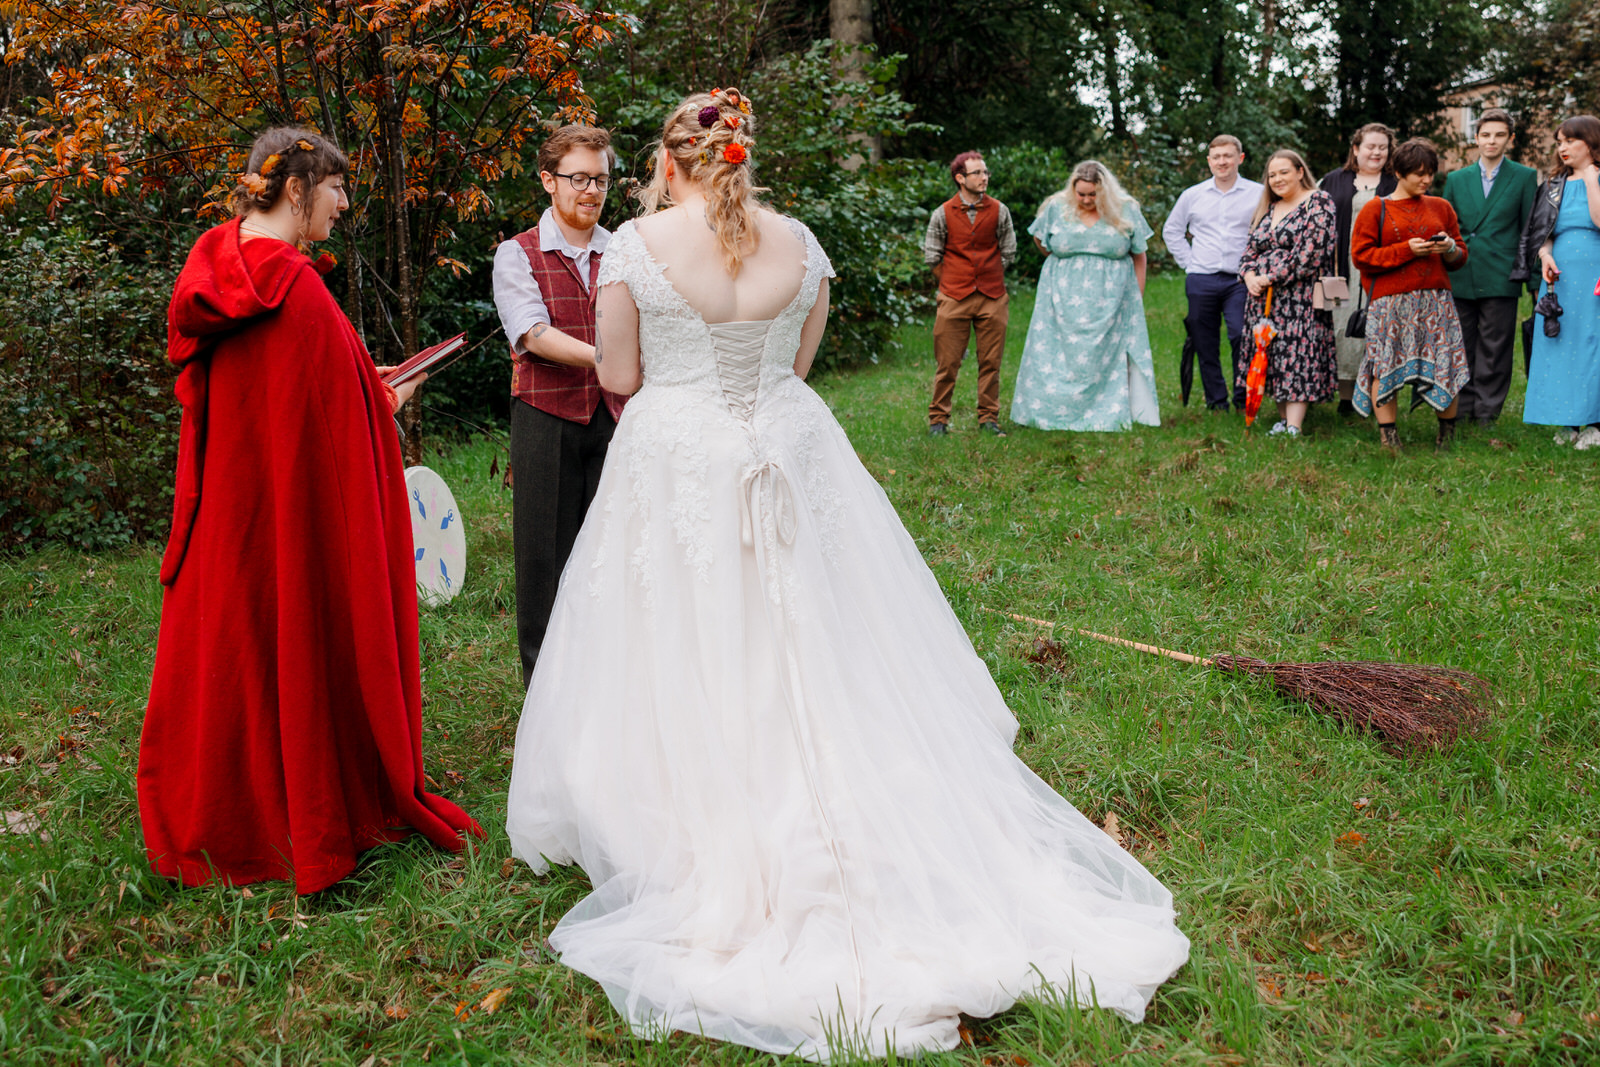 Handfasting ceremony Swansea, South Wales